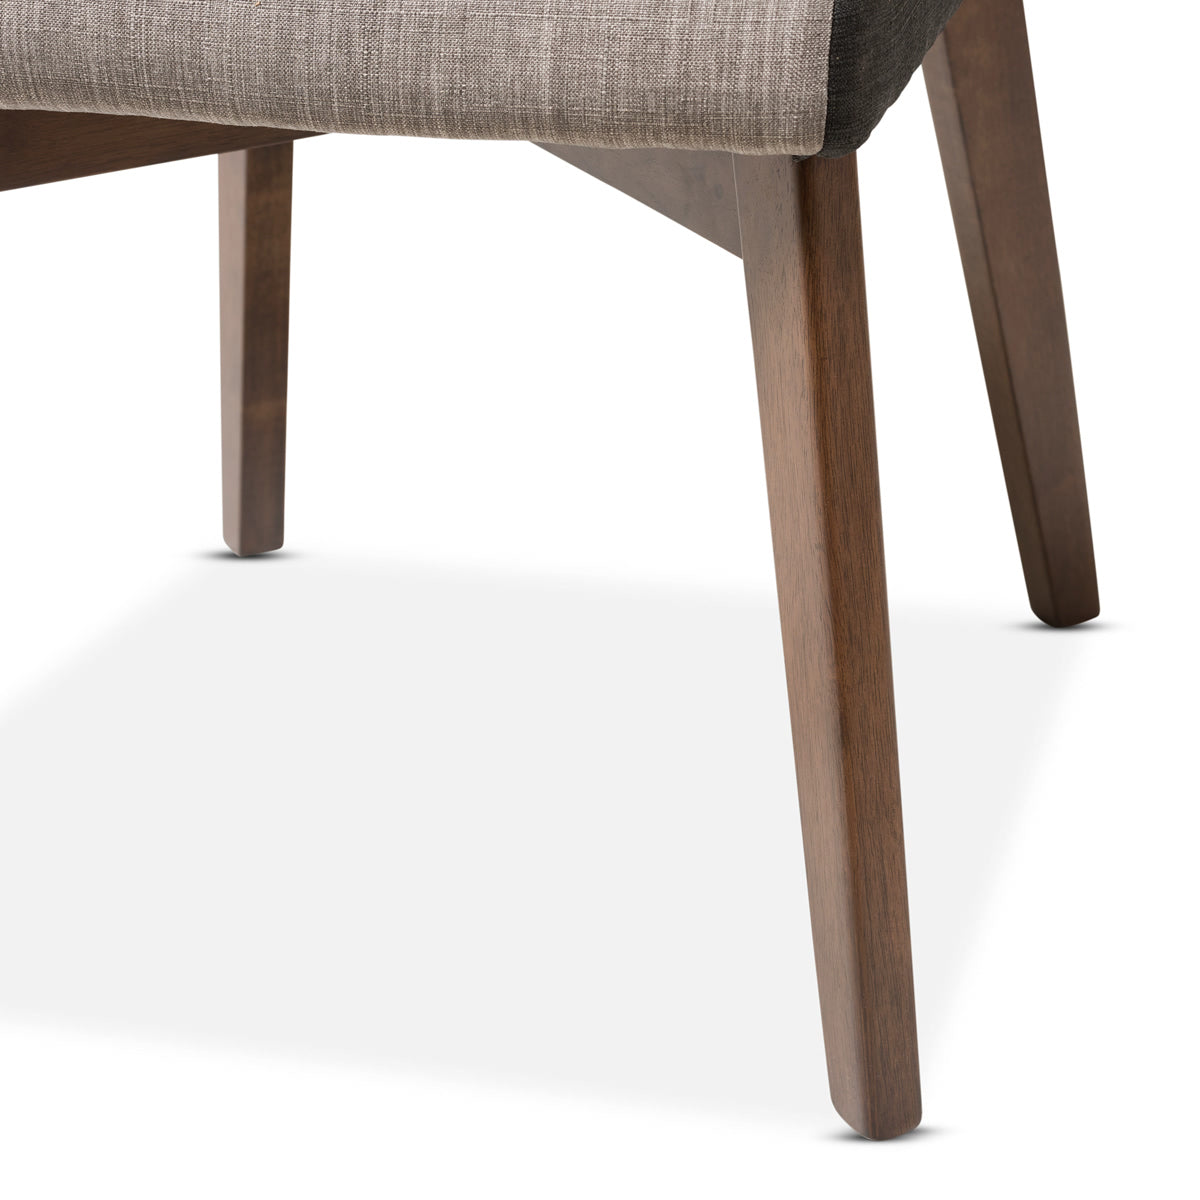 Baxton Studio Kimberly Mid-Century Modern Beige and Brown Fabric Dining Chair (Set of 2) Baxton Studio-dining chair-Minimal And Modern - 6